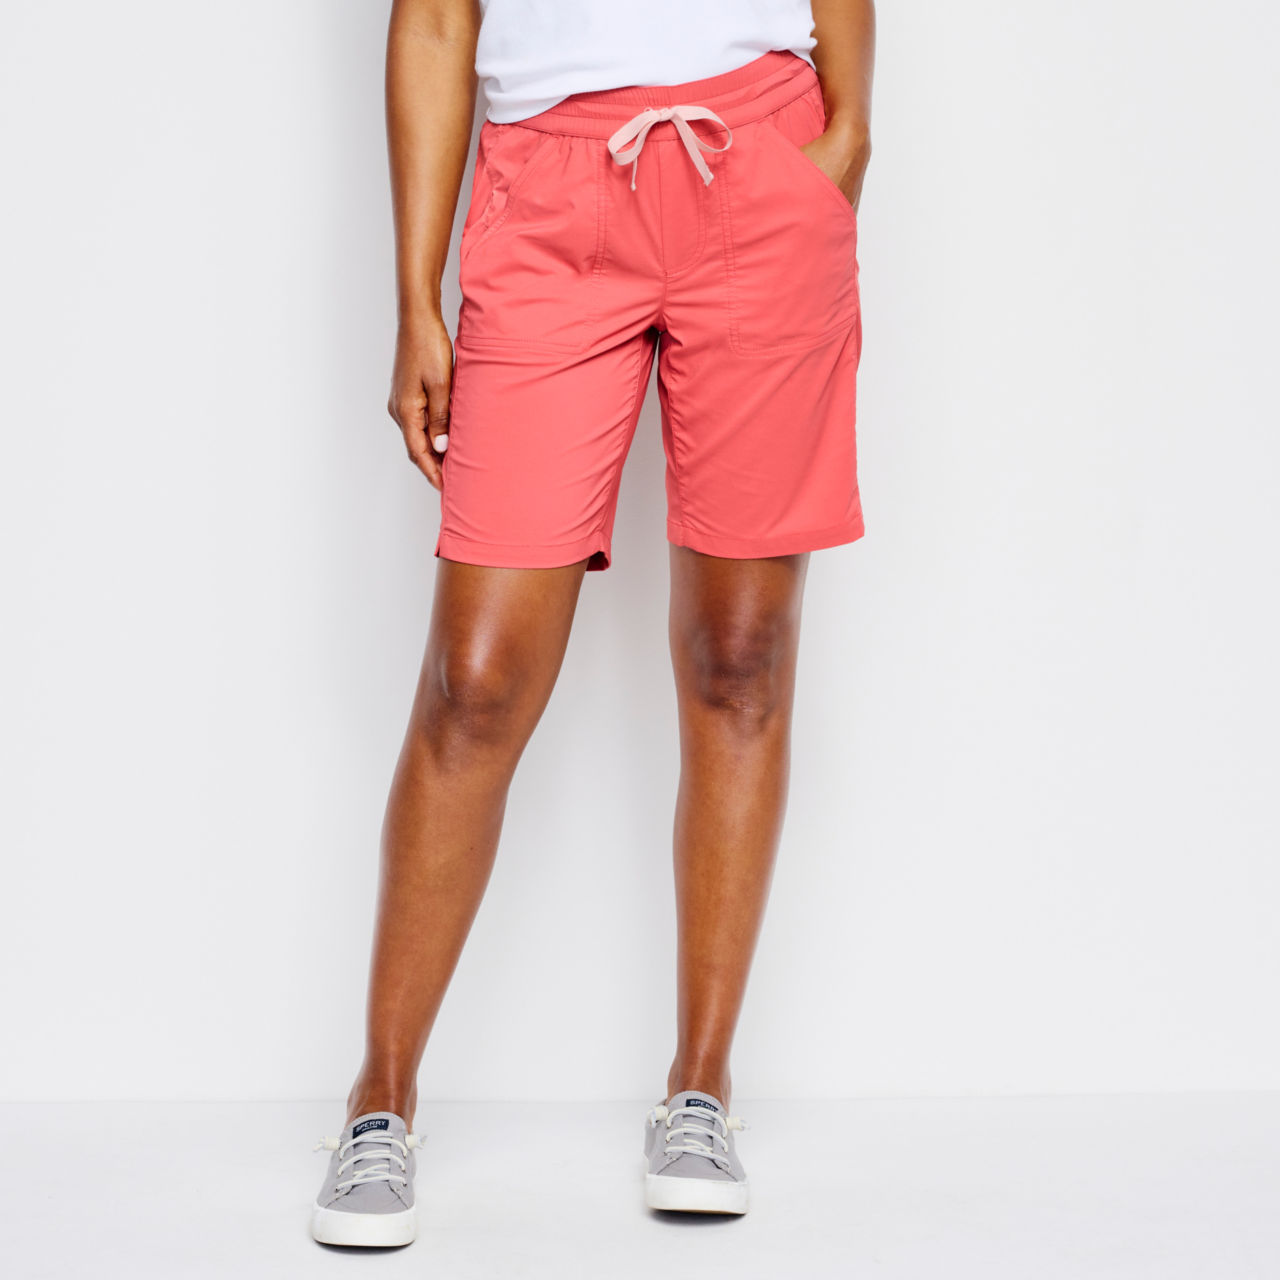 All-Around Relaxed Fit 8" Shorts -  image number 2